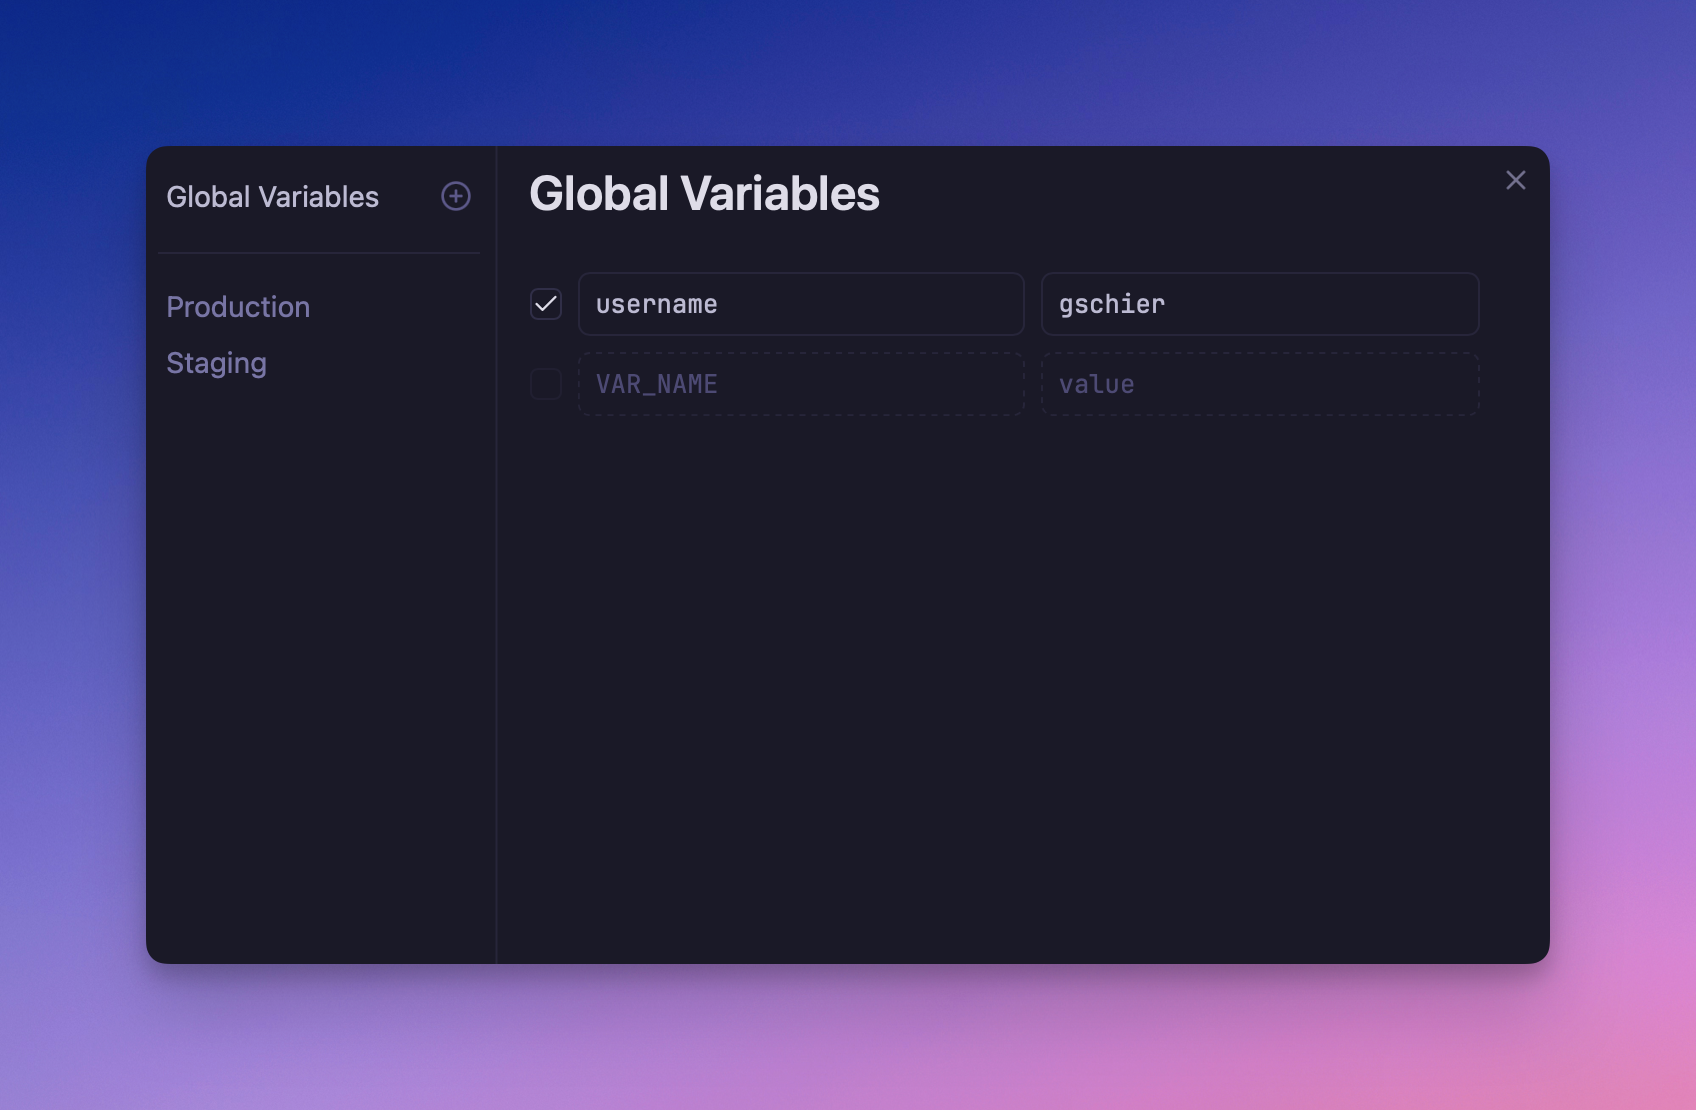 Variables defined in the global environment